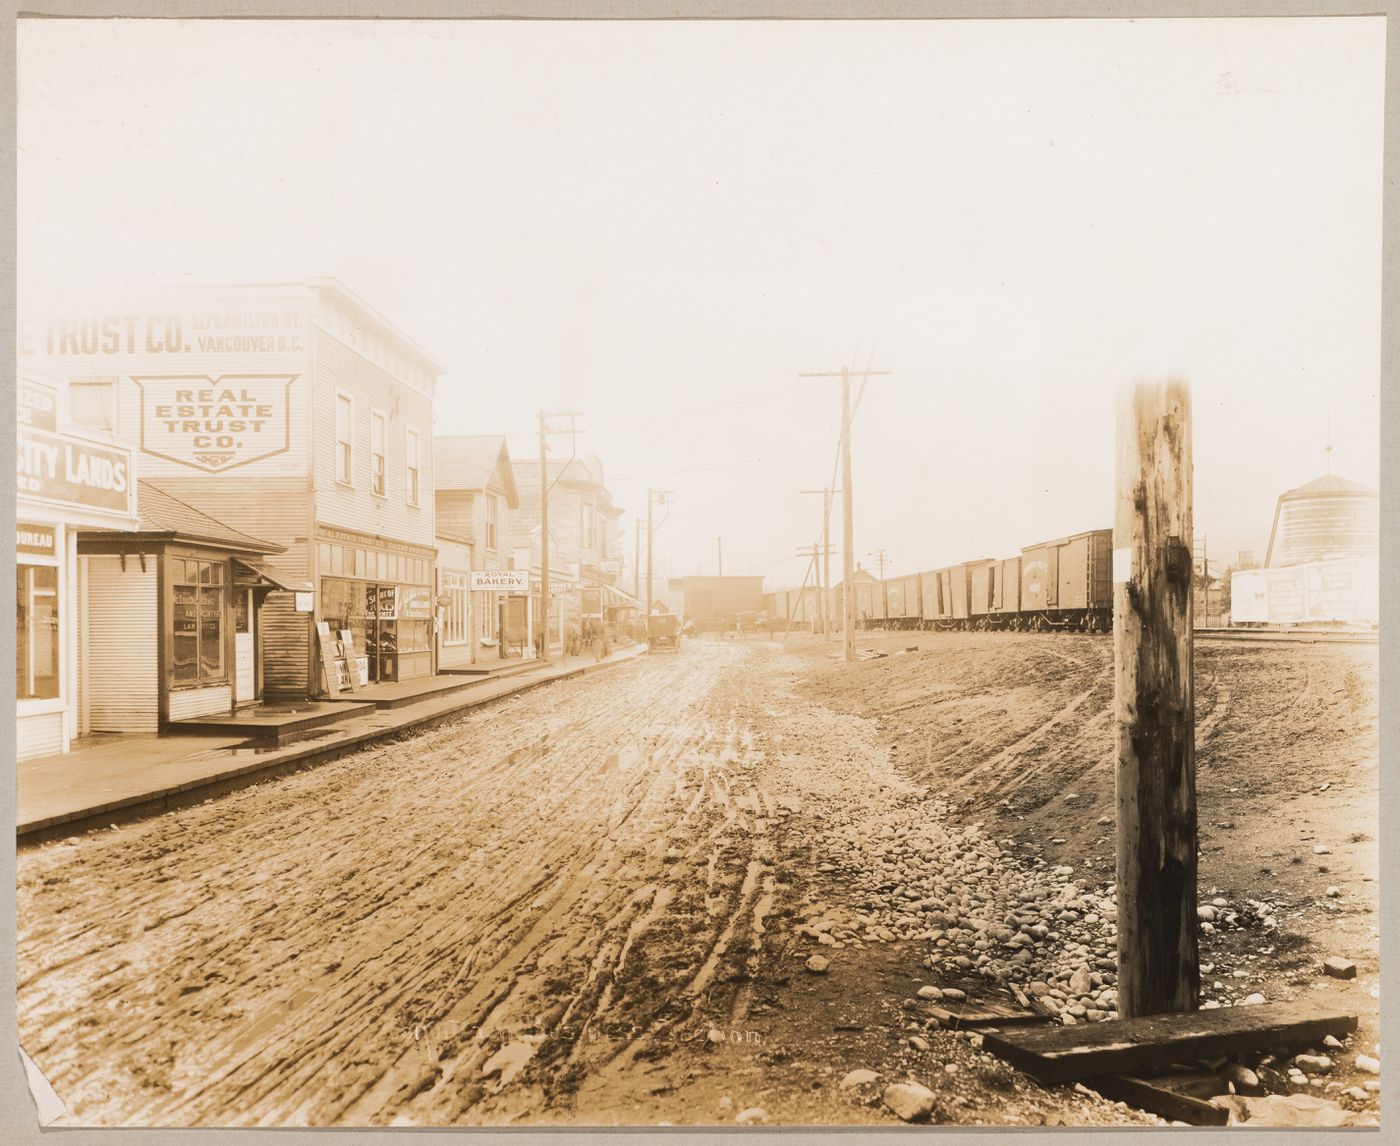 View of the Old Business Centre with a train on the right, Coquitlam (now Port Coquitlam), British Columbia